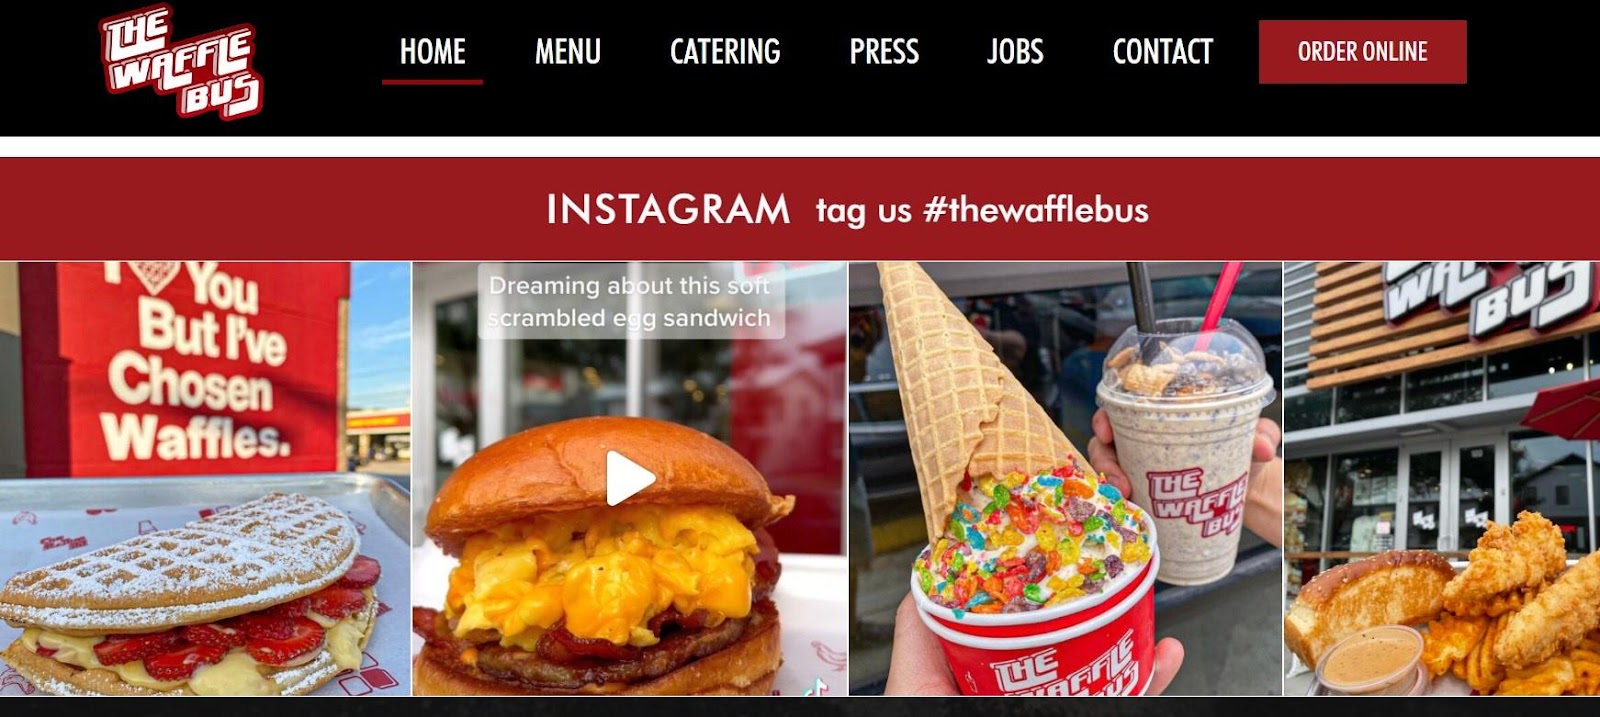 How to make your own food truck website — step 4: Use social media integration. Example web page from the Waffle Bus.